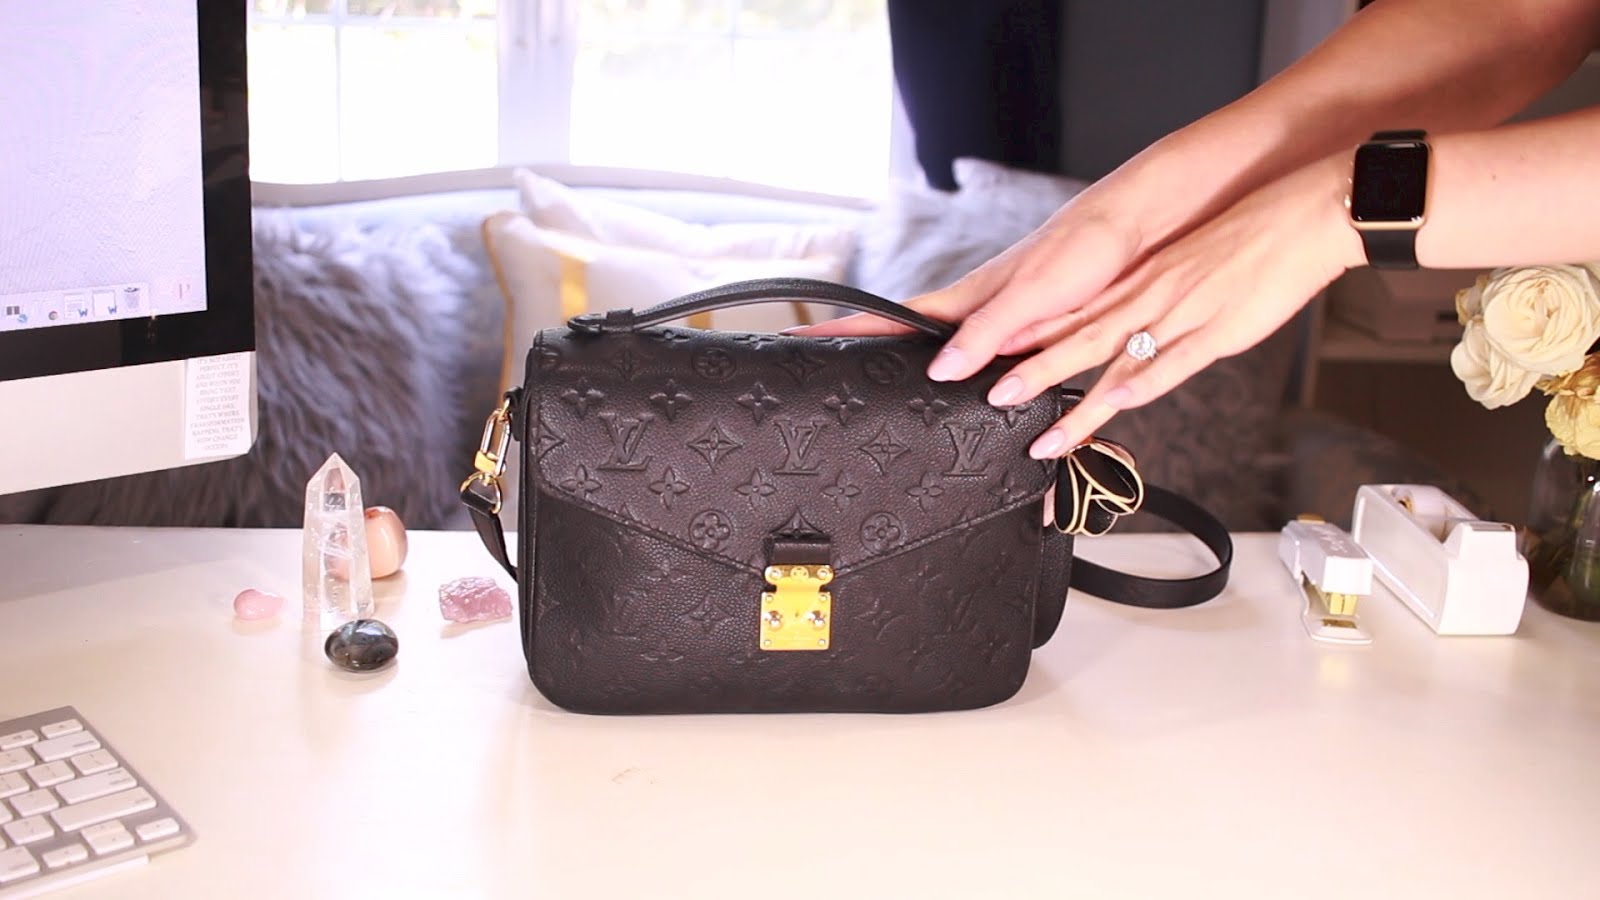 What's in my Bag - Pochette Metis